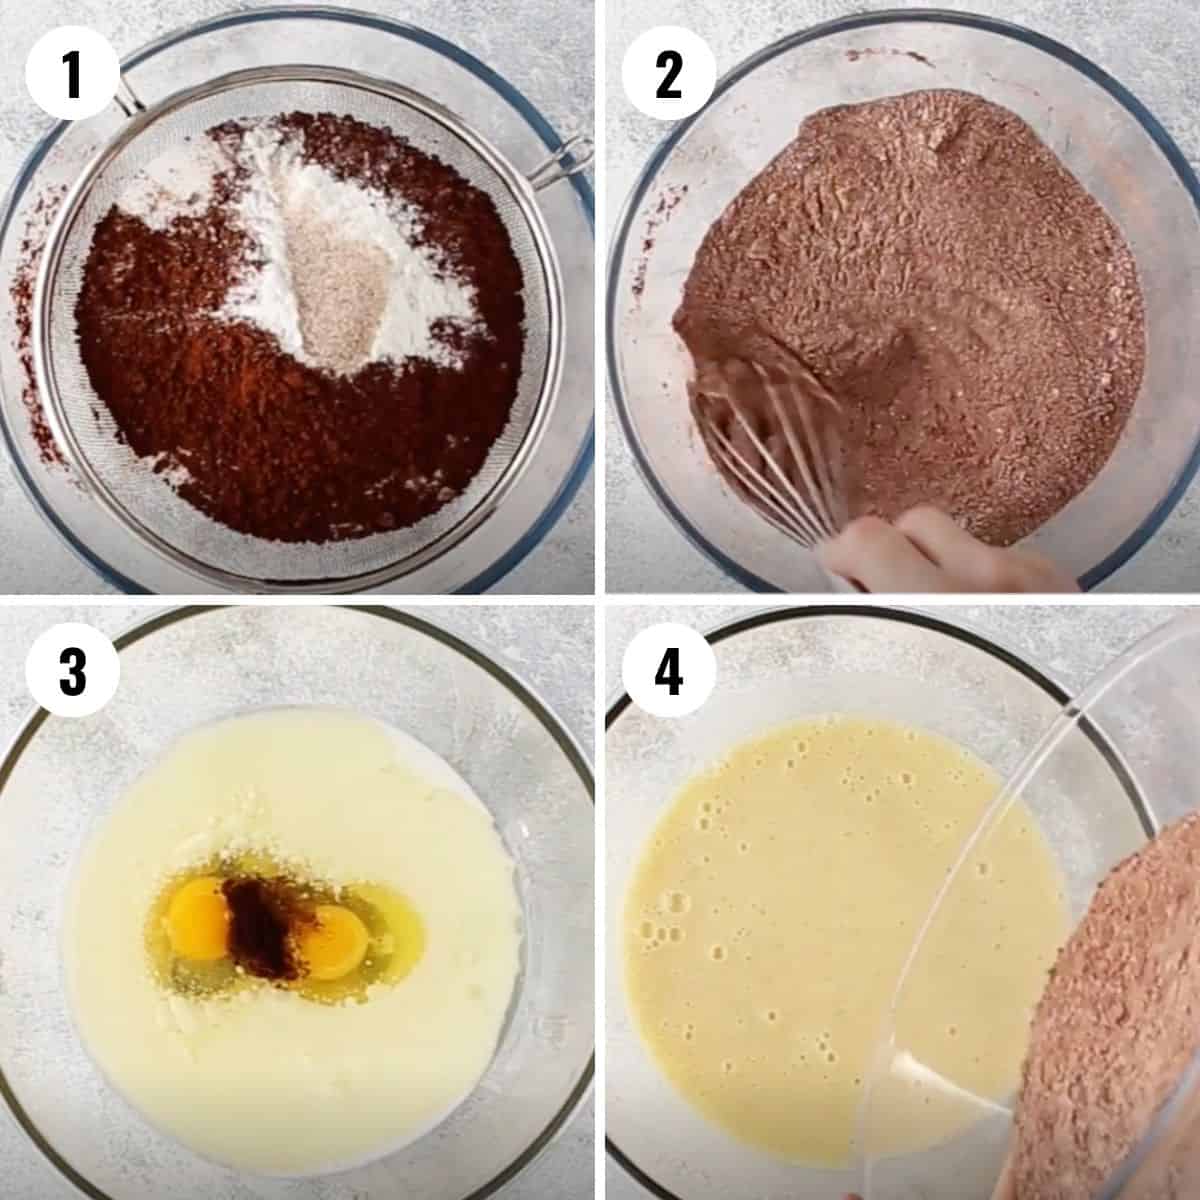 A collage showing the steps for mixing up the cake batter for an Easter egg cake.